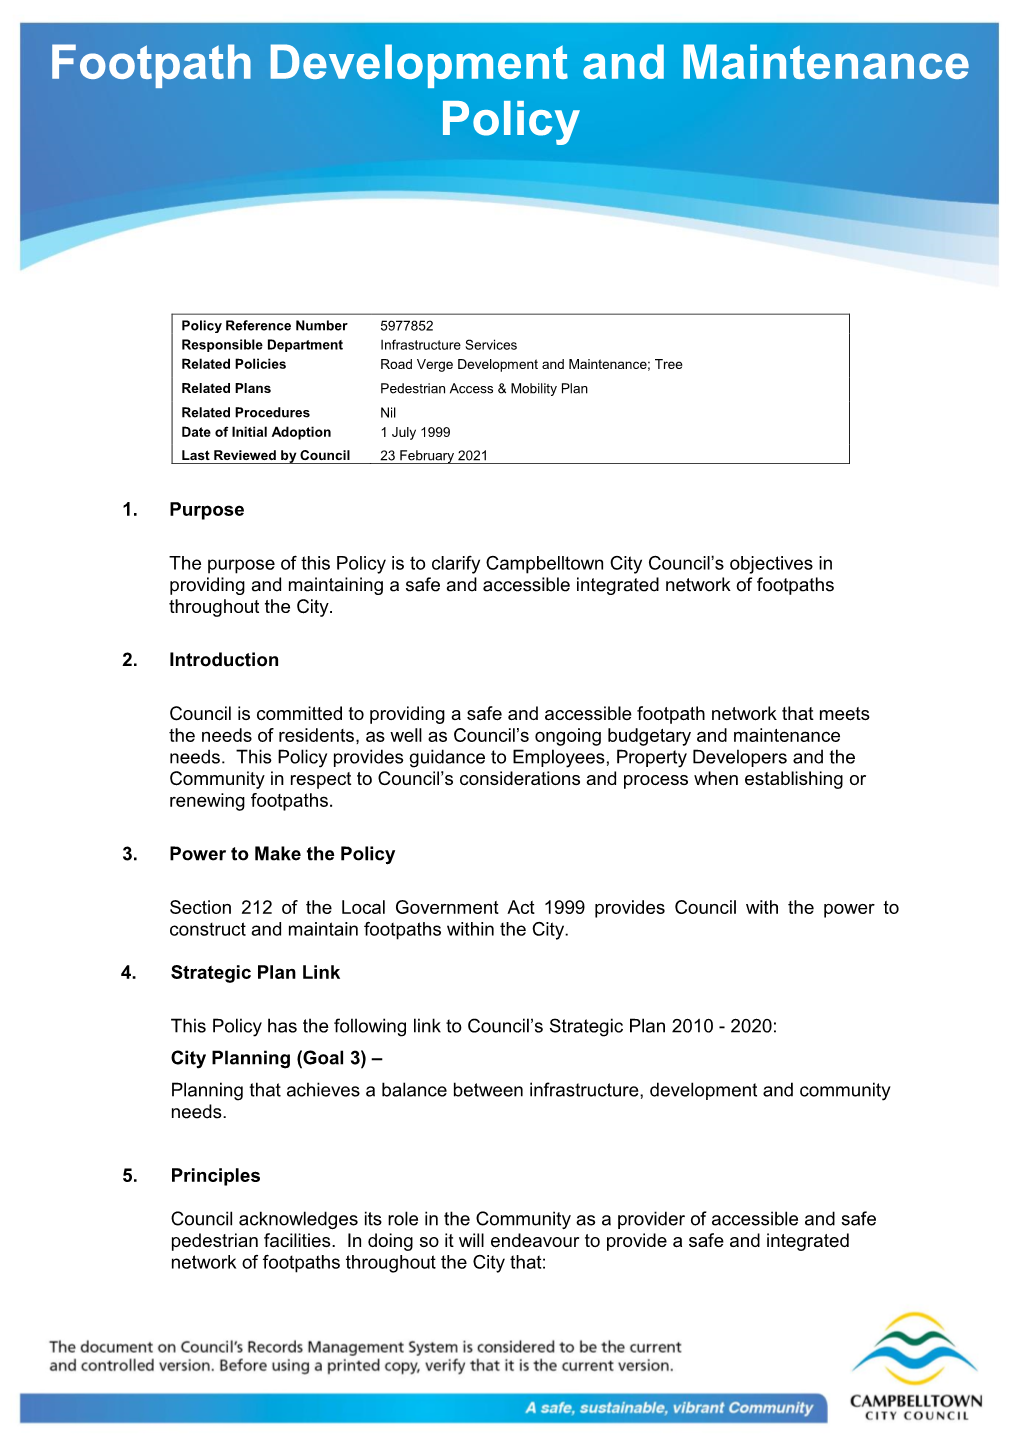 Footpath Development and Maintenance Policy ECM #5977852 Page 2/5